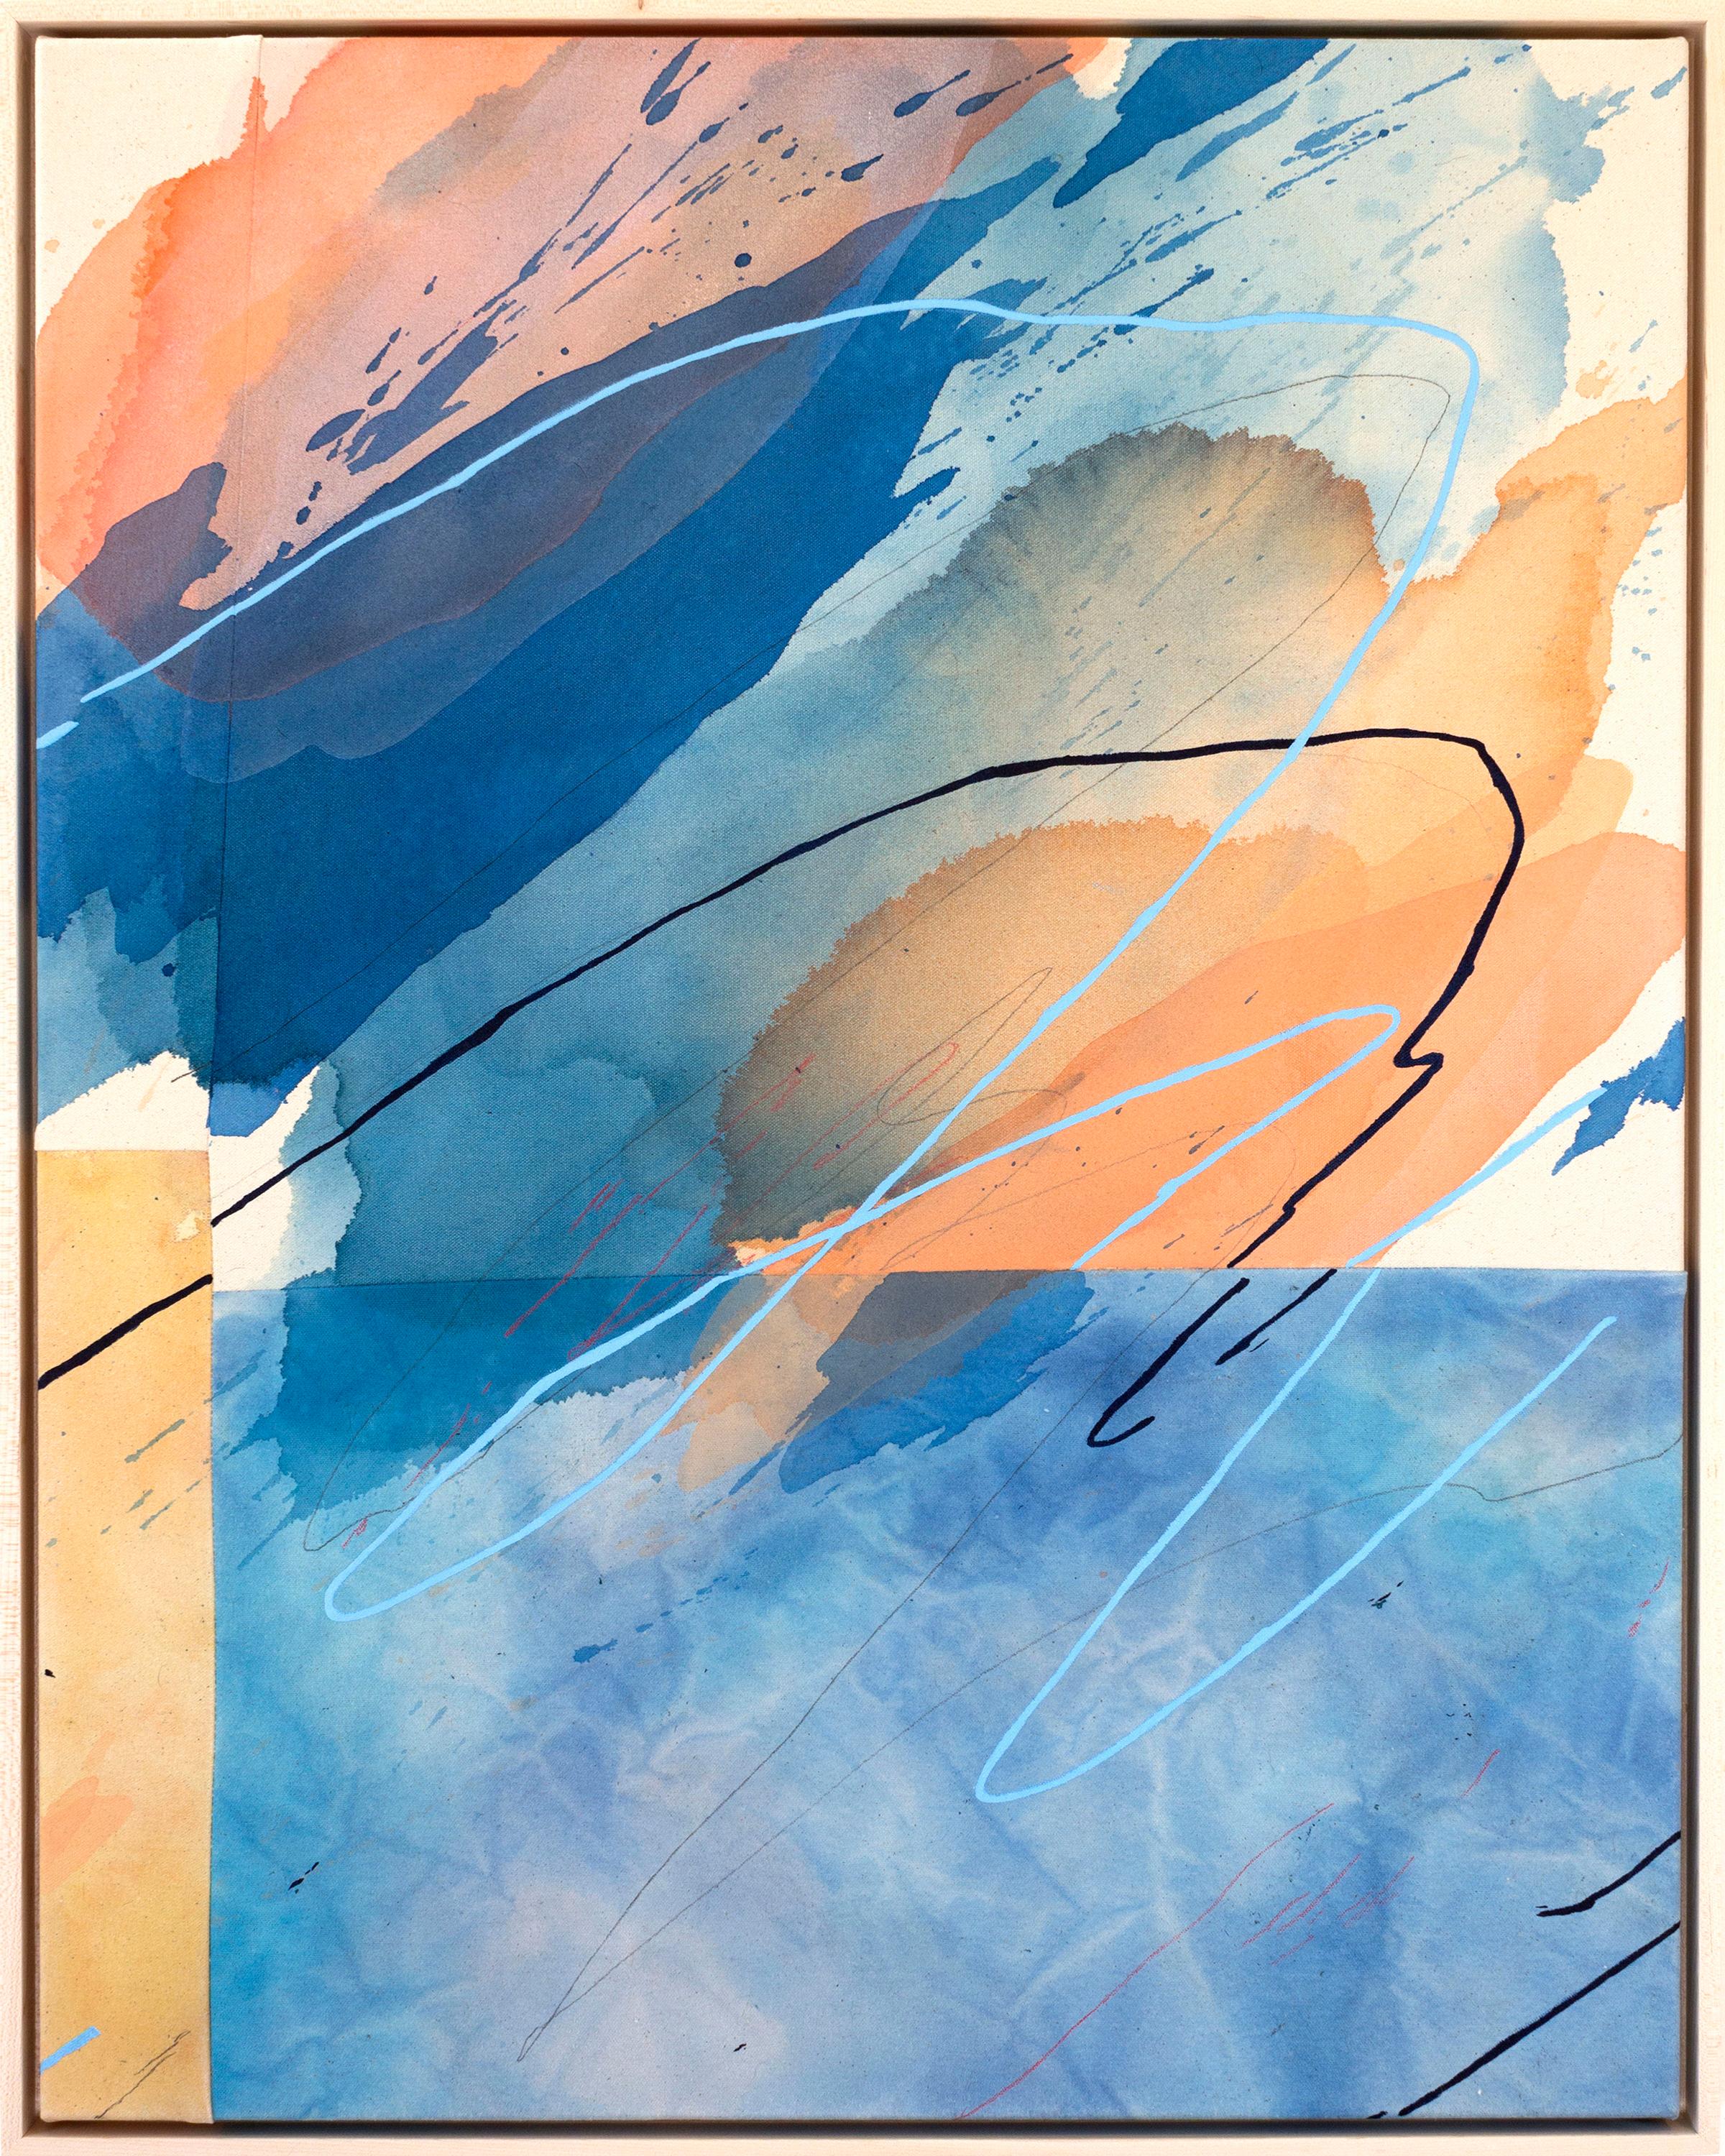 This work on canvas is a mixed media abstract work featuring hues of blue and orange.
Framed in a nature floater frame measuring 31.25 by 25.25 inches.

Evan is inspired by the works of Frank Bowling, Helen Frankenthaler, Candida Alvarez and Dorothy